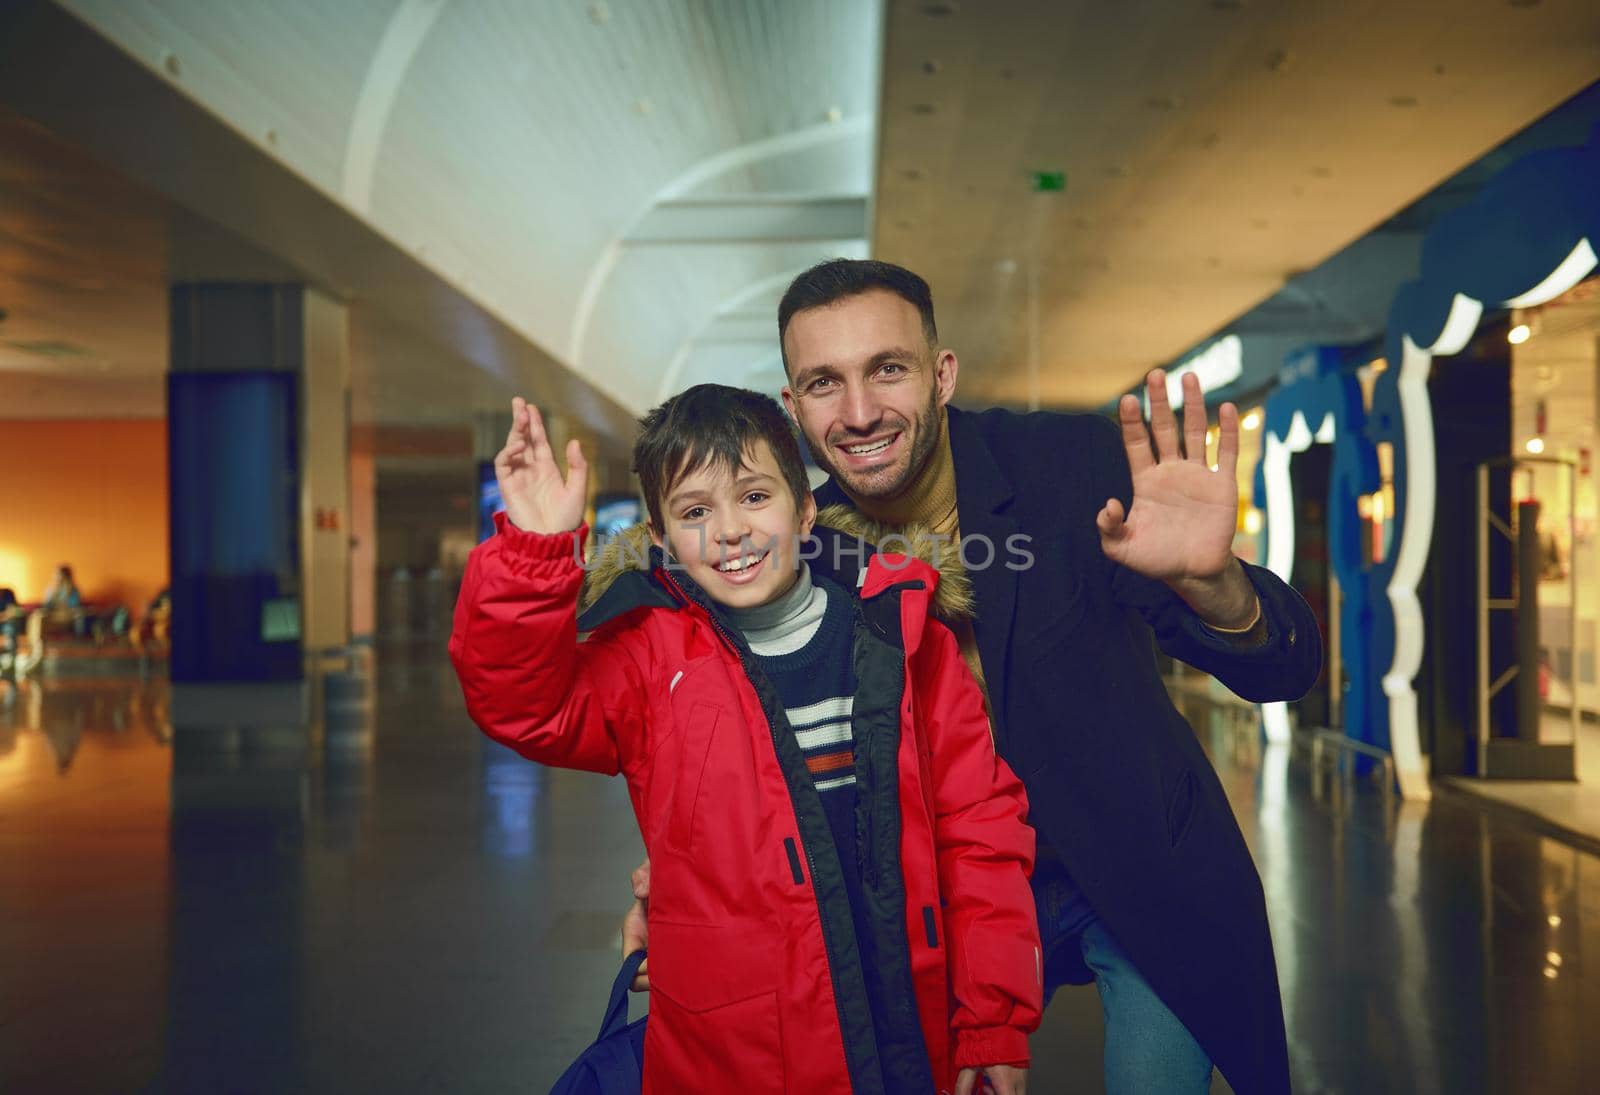 Handsome Middle Eastern man father and his adorable son, passengers, waving looking at camera while walking through duty free shops in international airport departure terminal and waiting for a flight